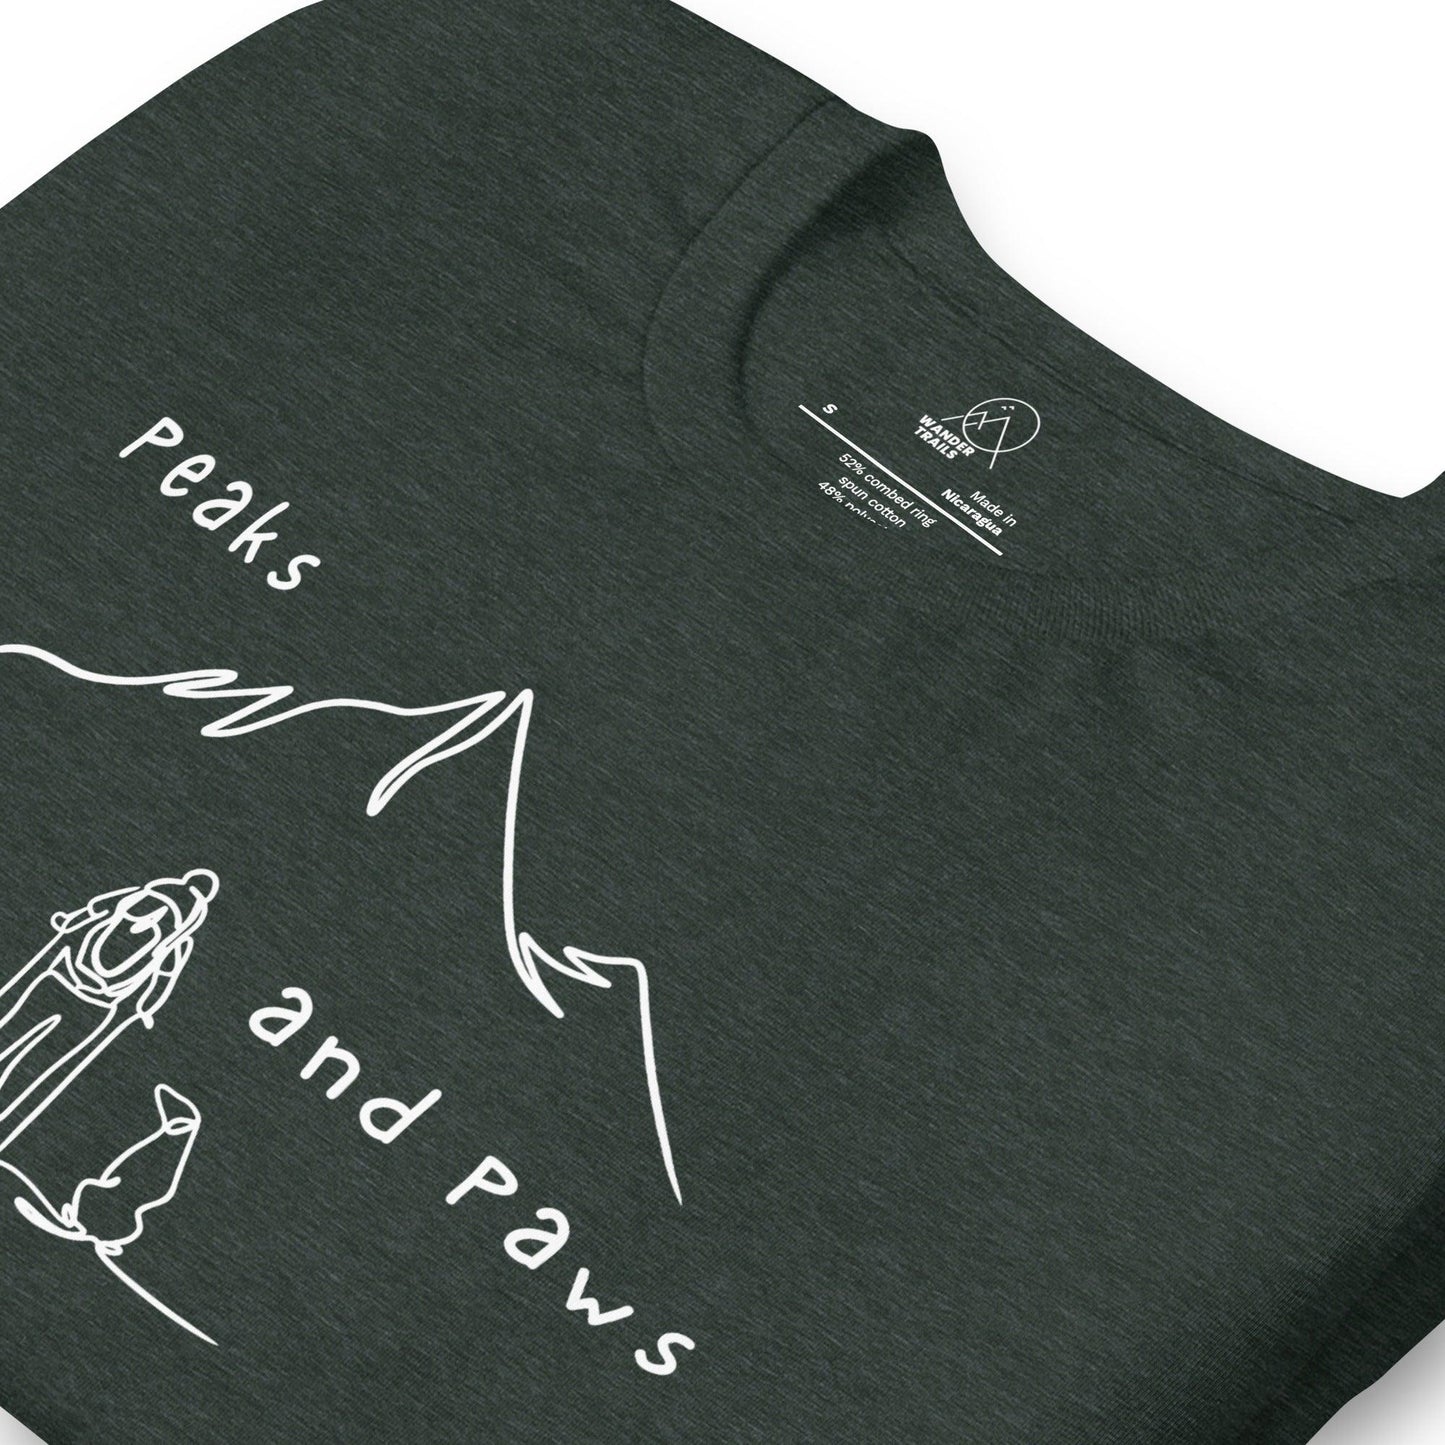 Peaks and Paws Unisex T-shirt